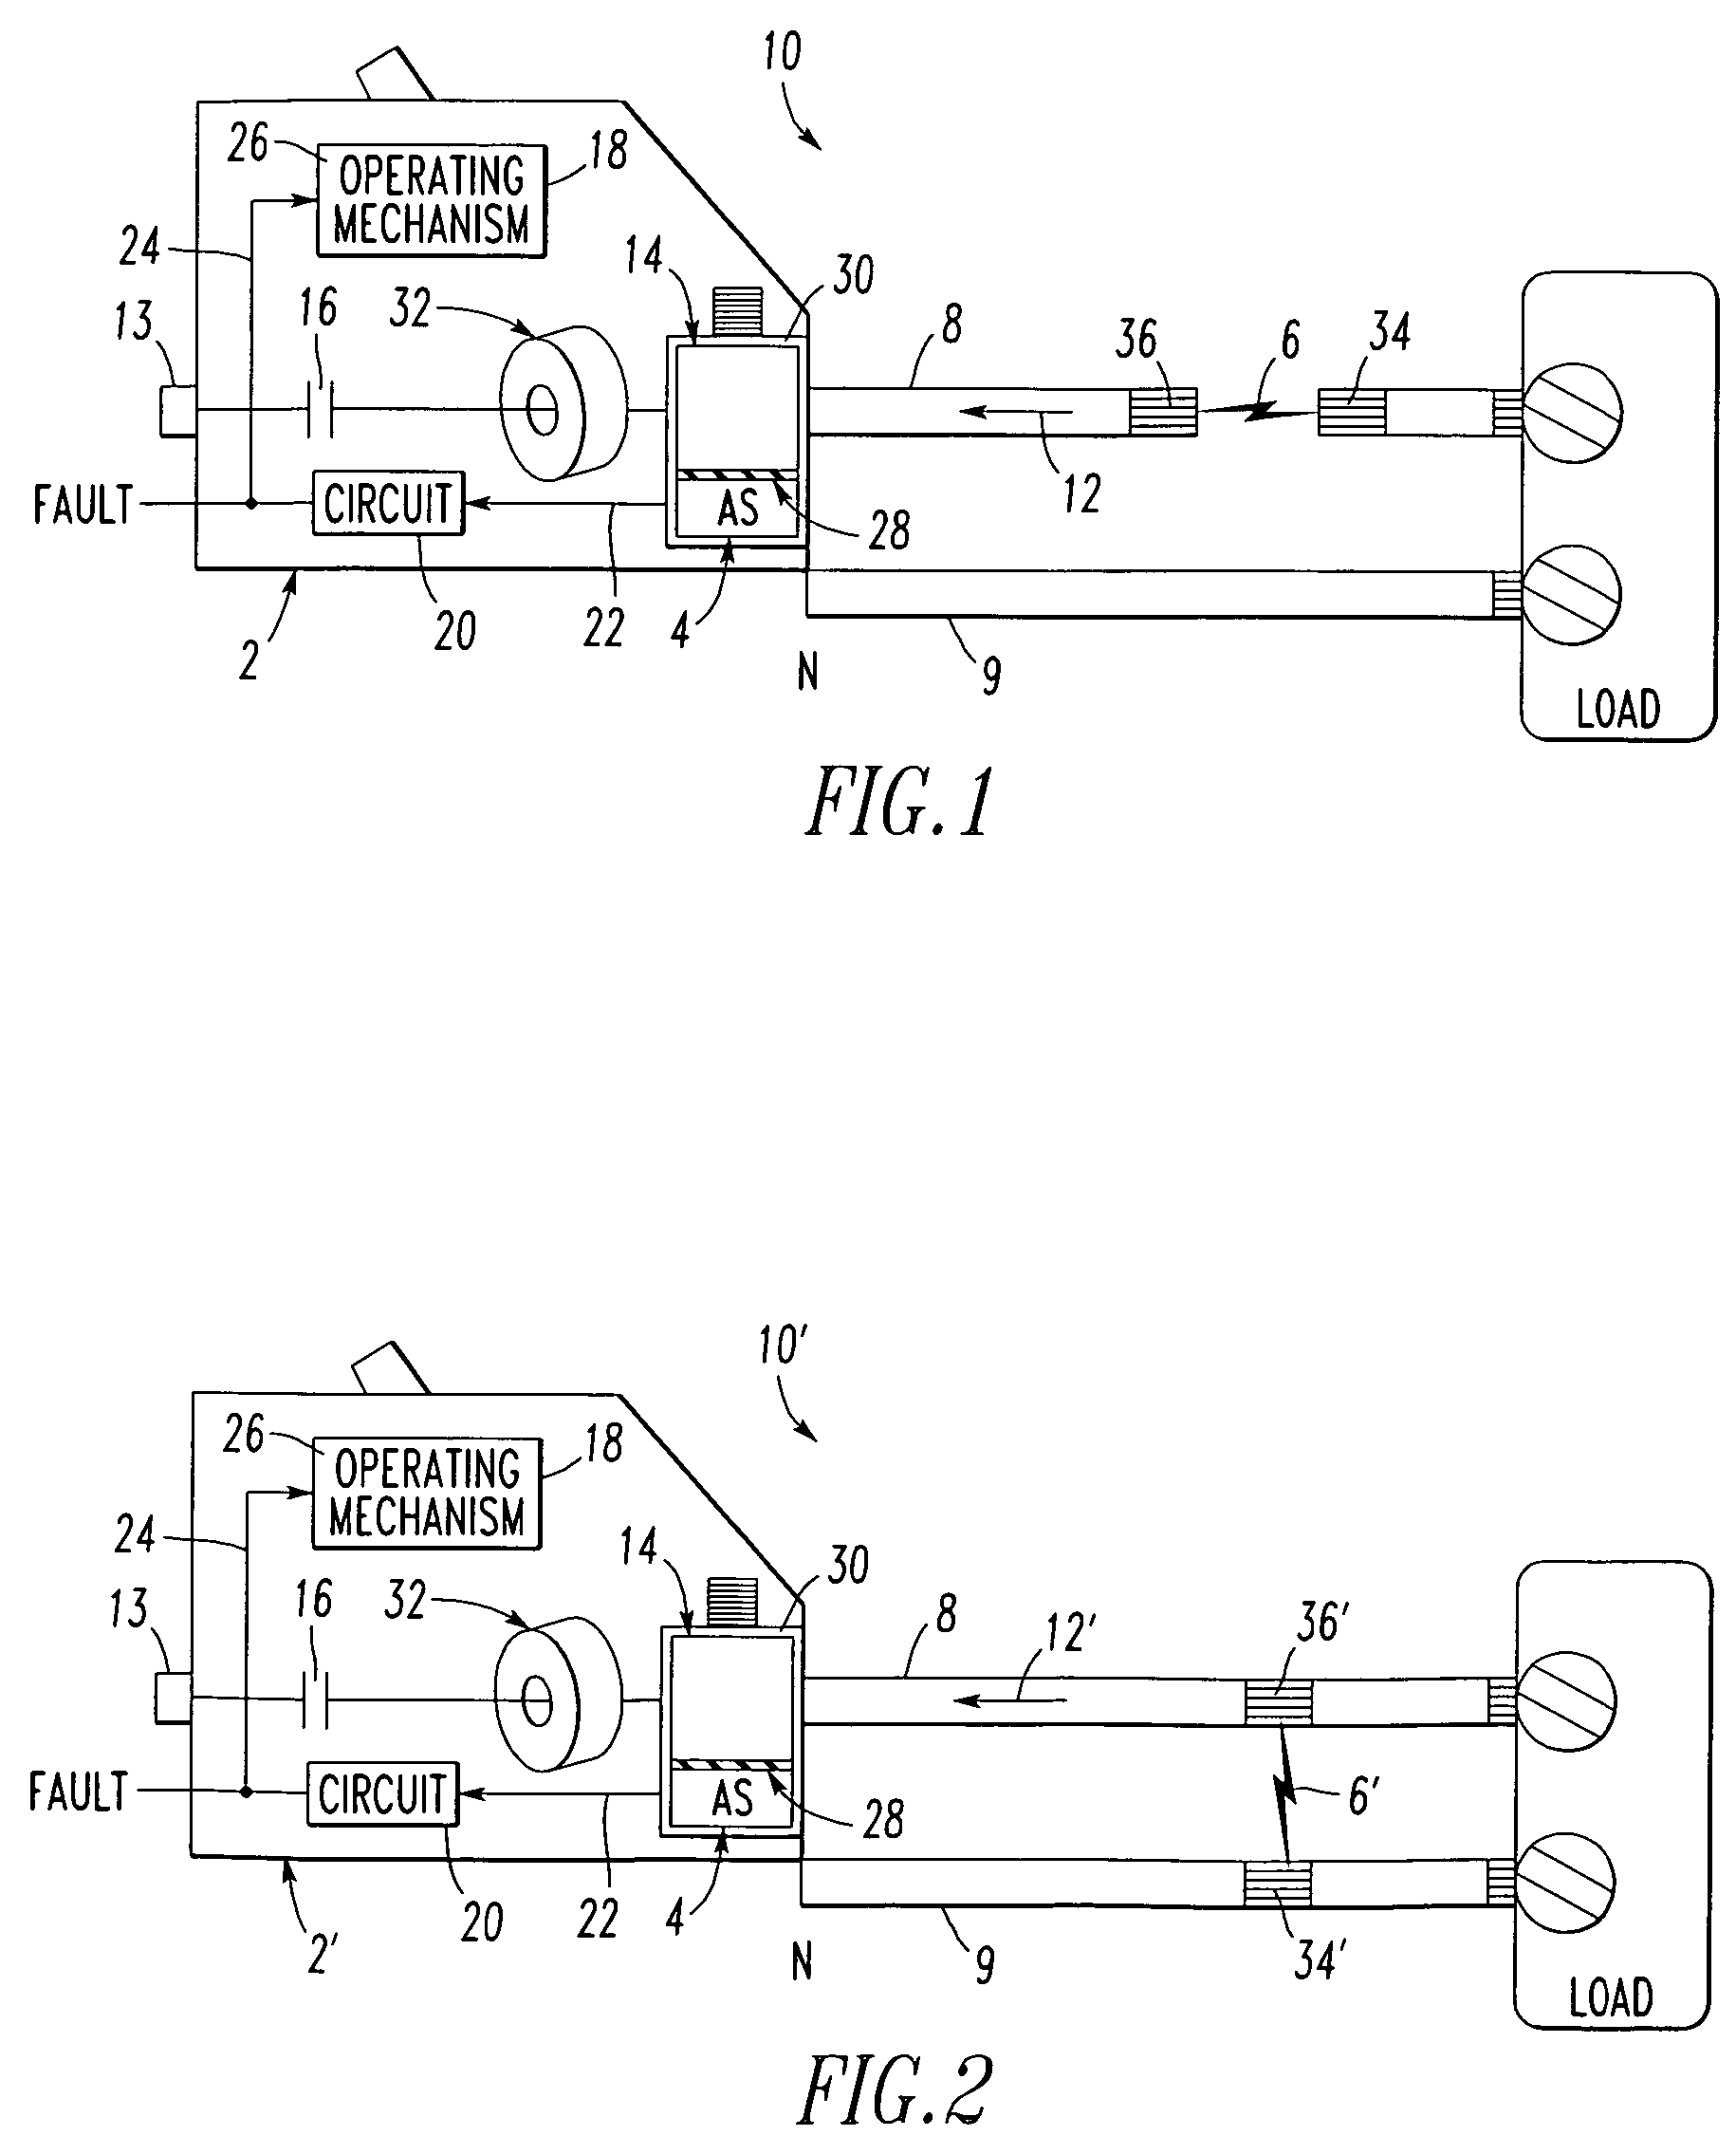 Electrical switching apparatus and method including fault detection employing acoustic signature